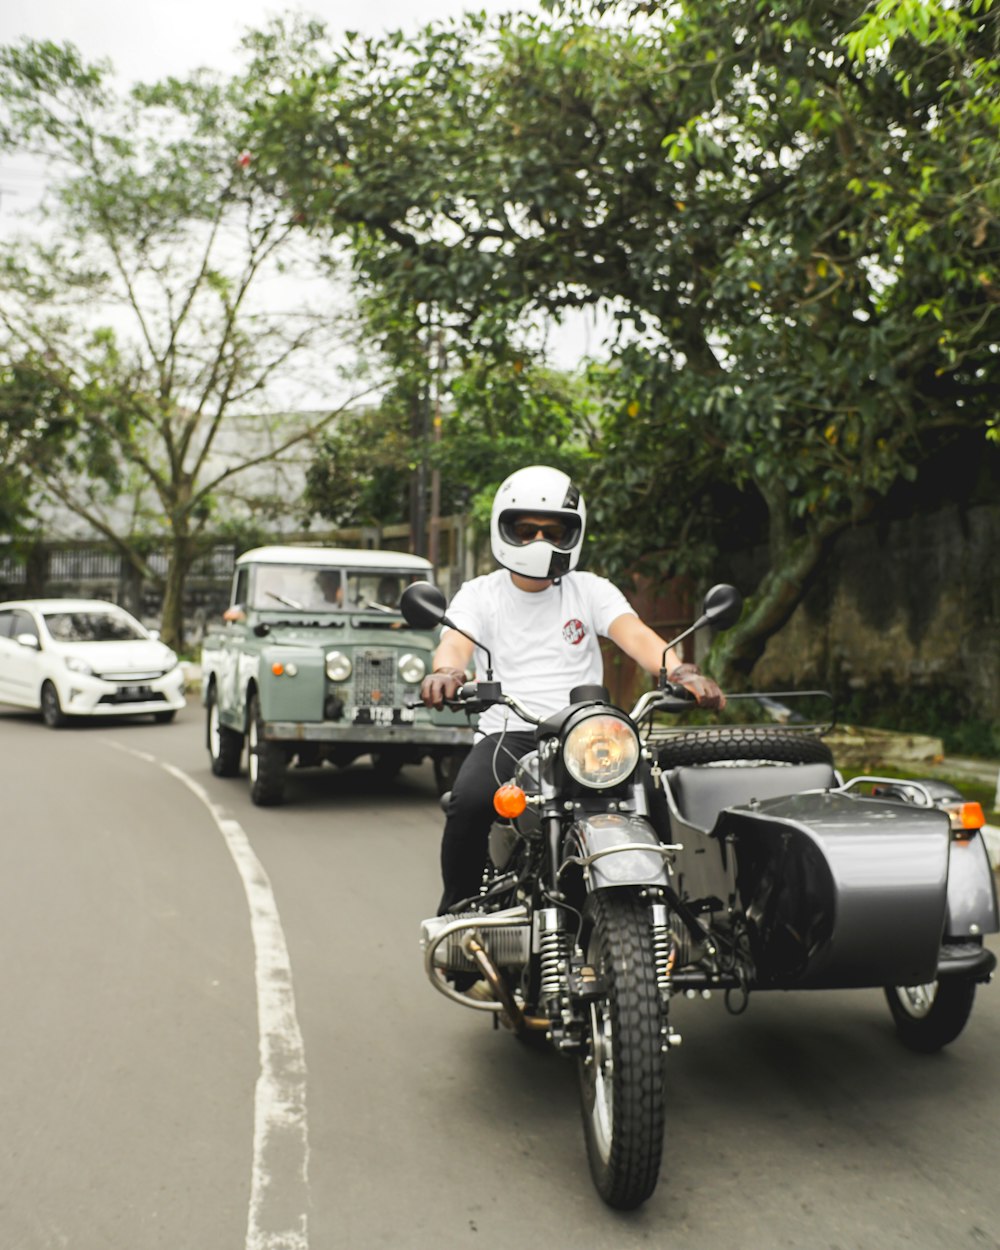 man in white helmet riding motorcycle on road during daytime